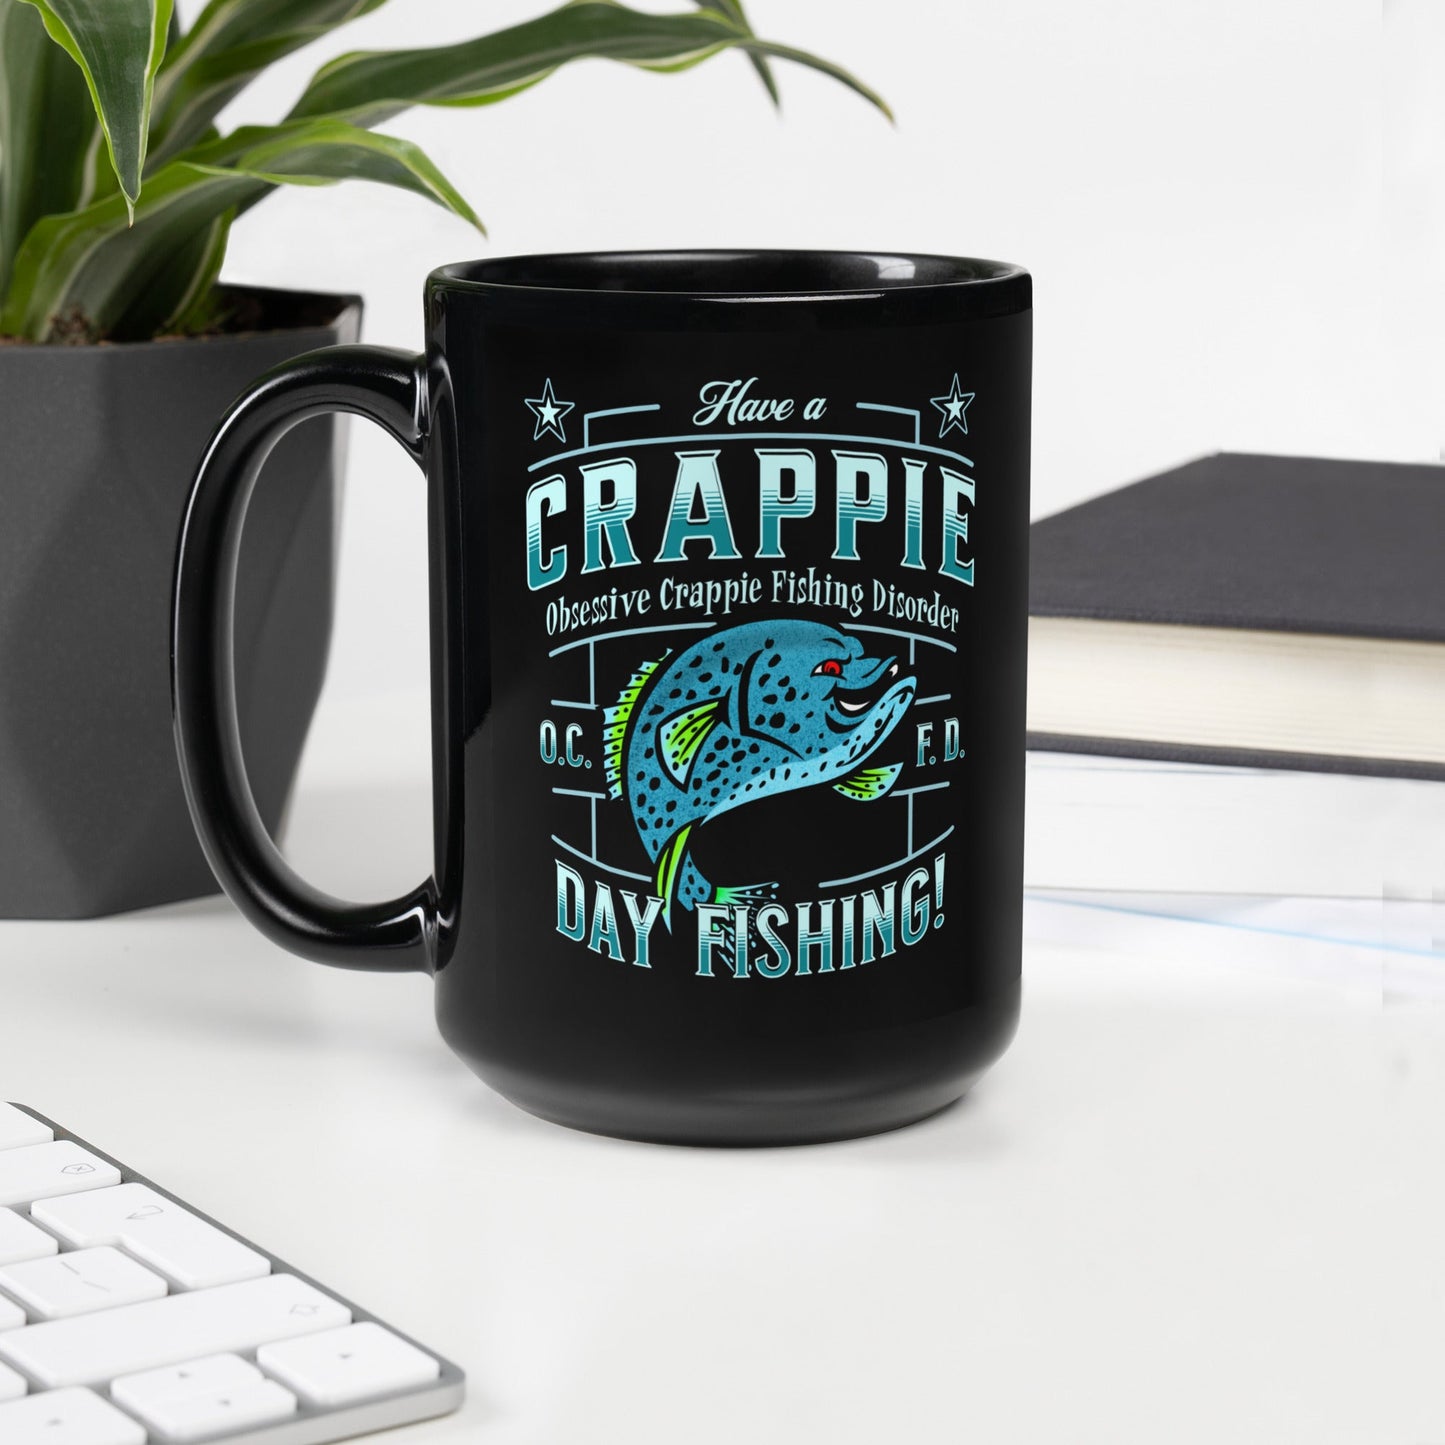  Coffee Mug (Black) Have a Crappie Day Fishing ArcZeal Designs